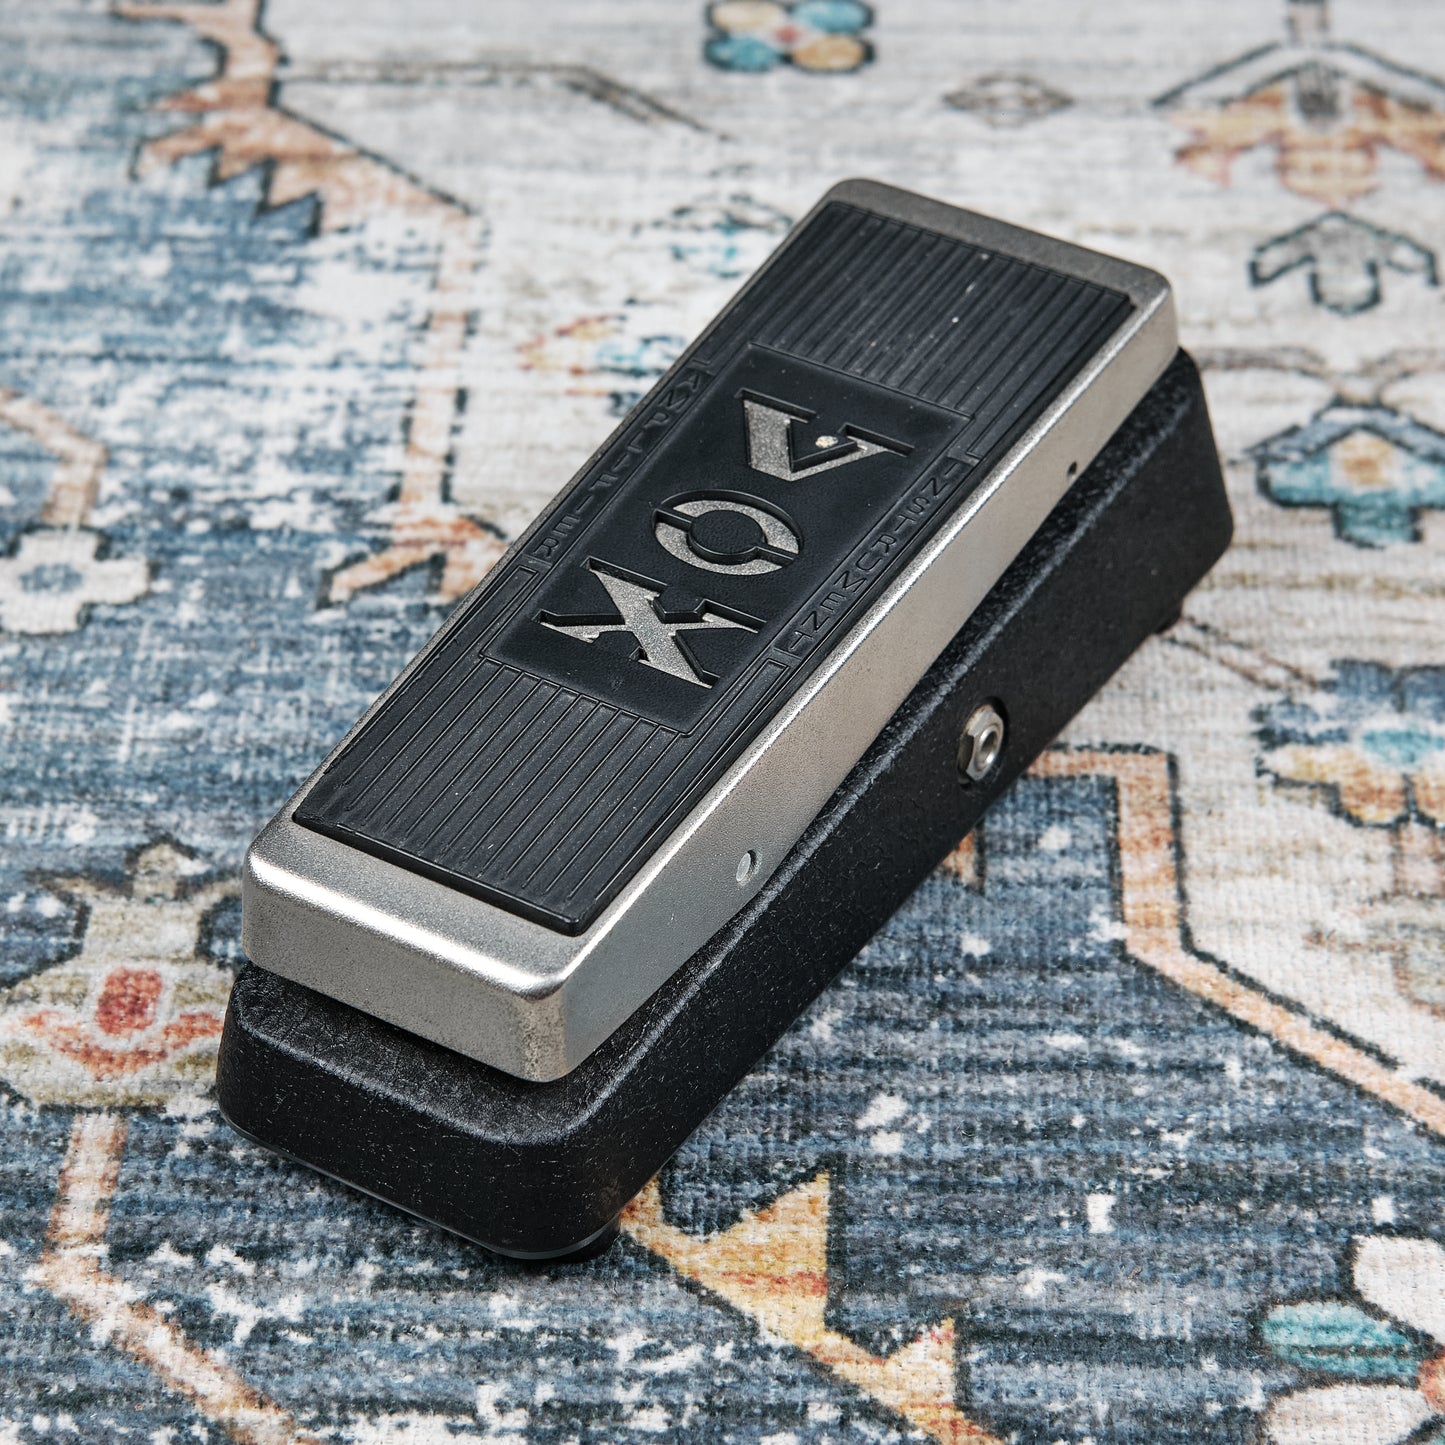 Vox V846-HW Hand-Wired Wah Pedal (Second-Hand)